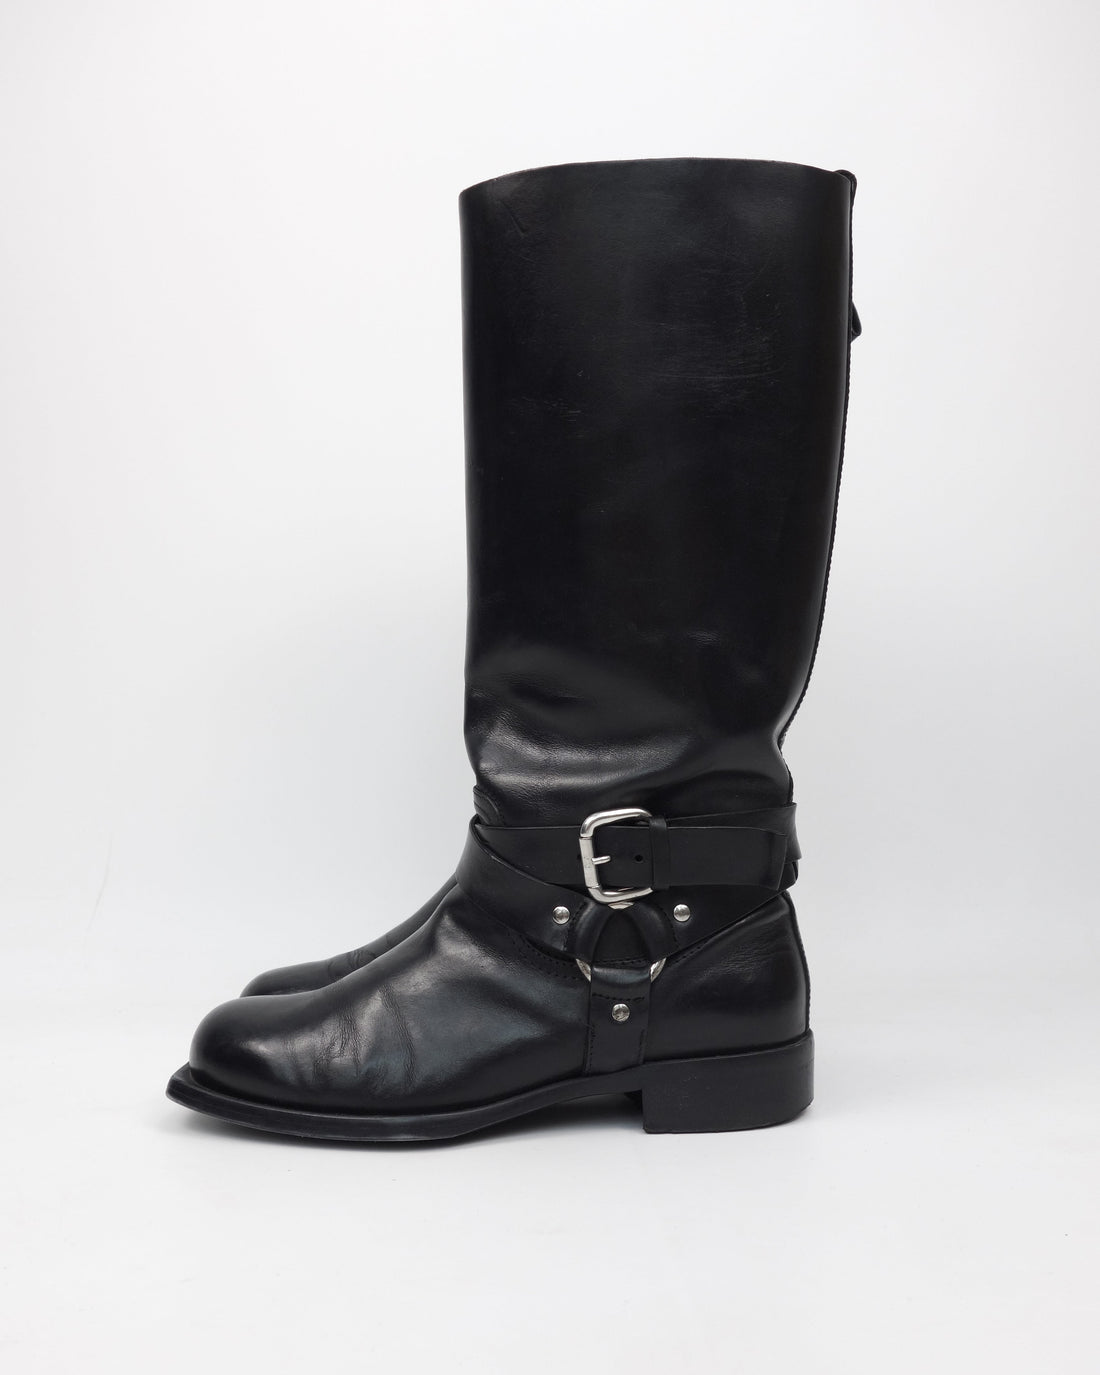 Diesel Belted High Leather Boots 2000’S